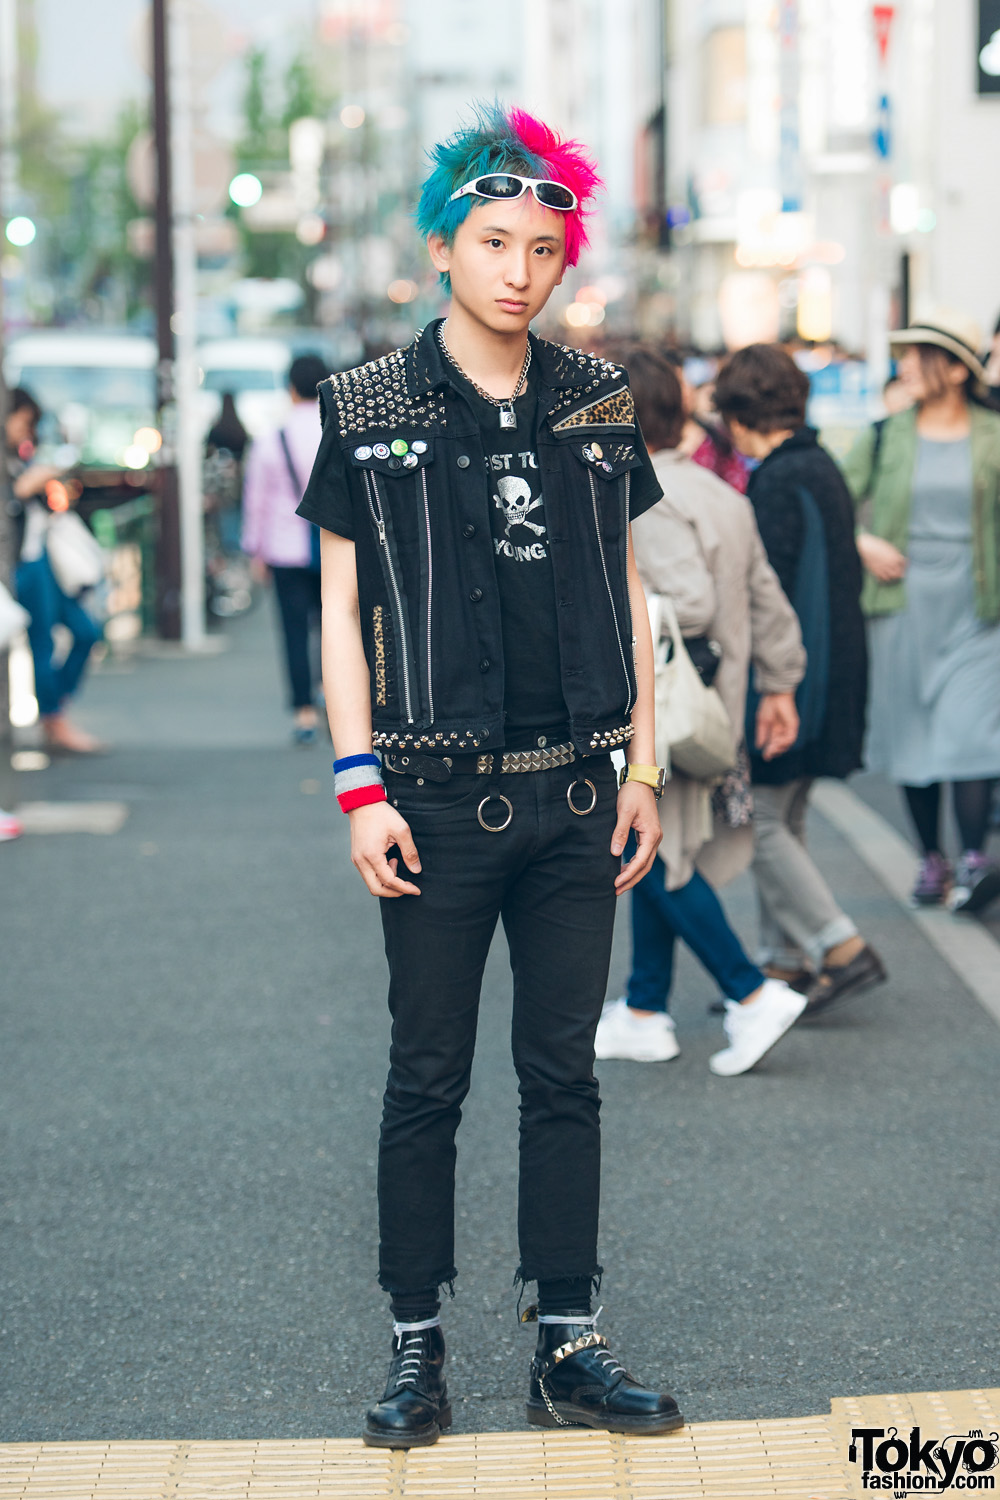 Punk Street Style in Tokyo w/ Studded The Clash Vest & Dr. Martens Boots